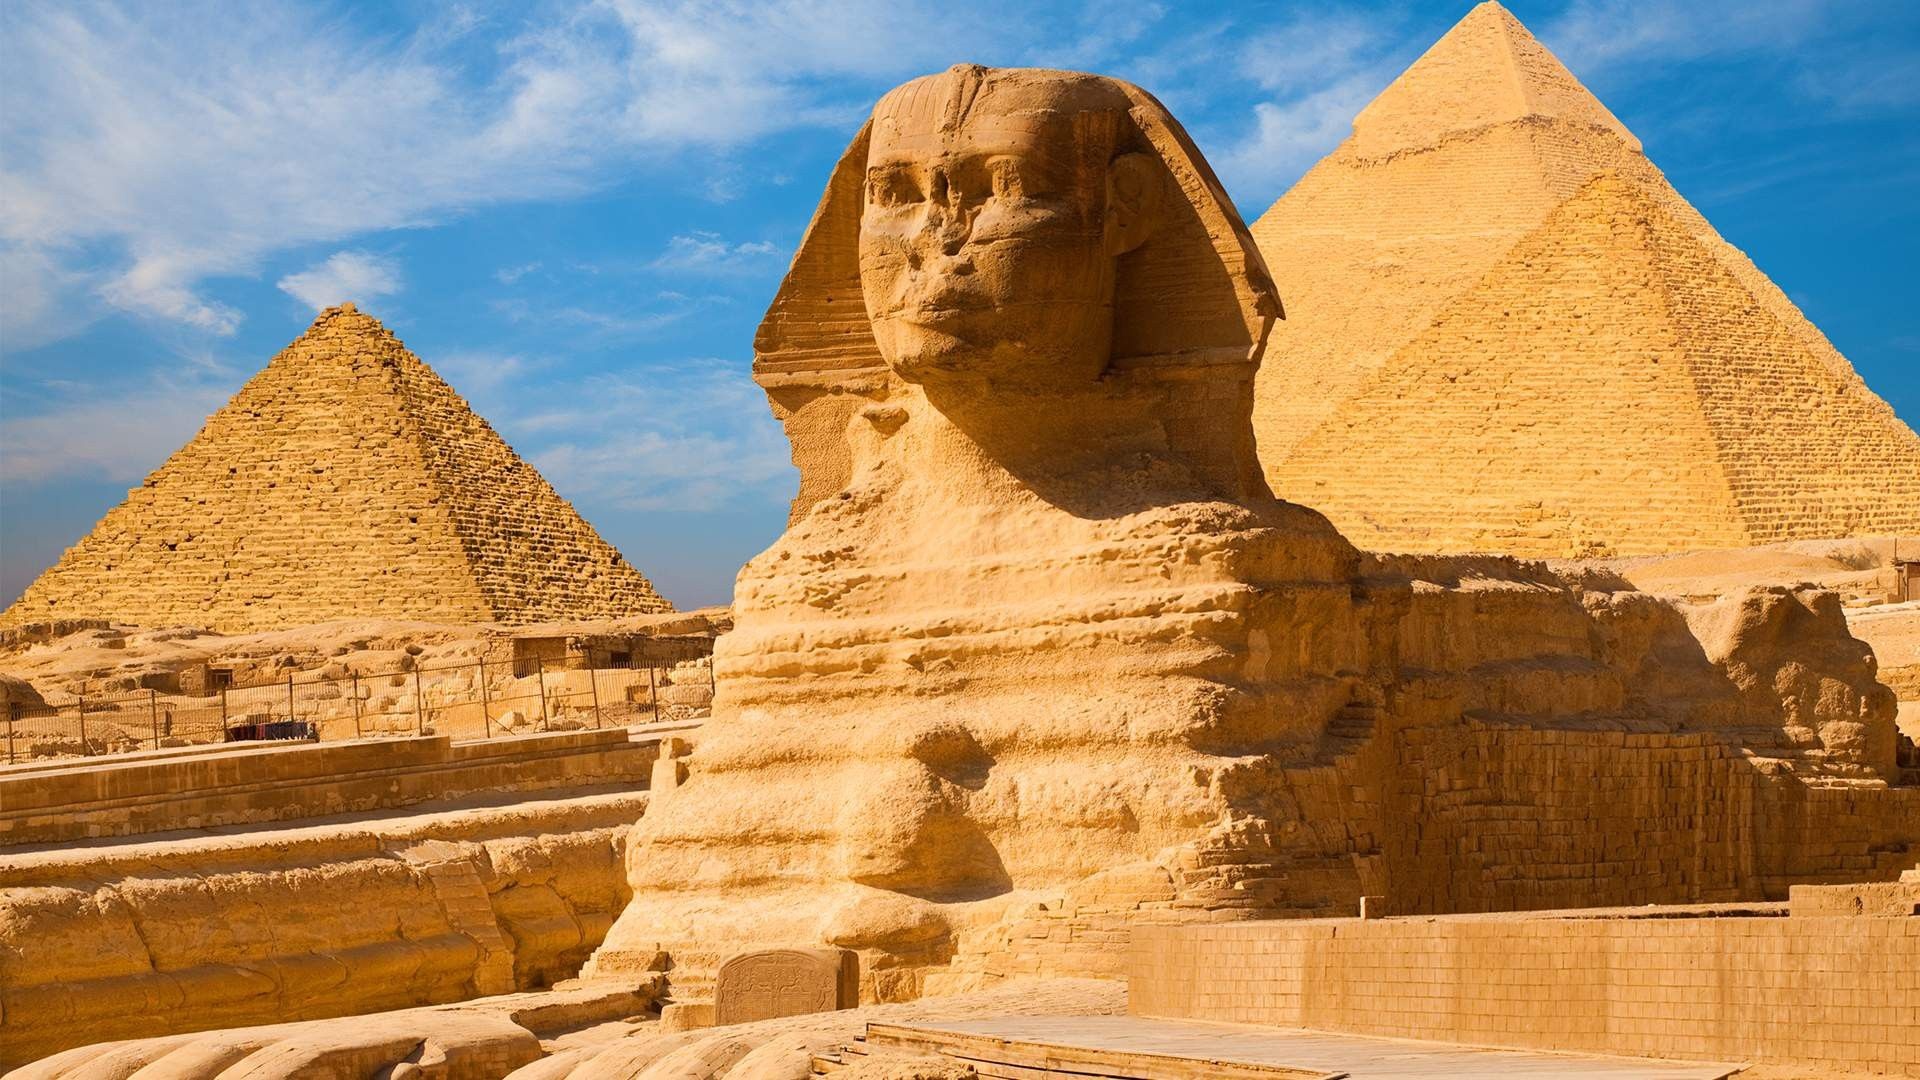 The Great Sphinx, History obsessed, Ancient Egyptian, Historical monument, 1920x1080 Full HD Desktop